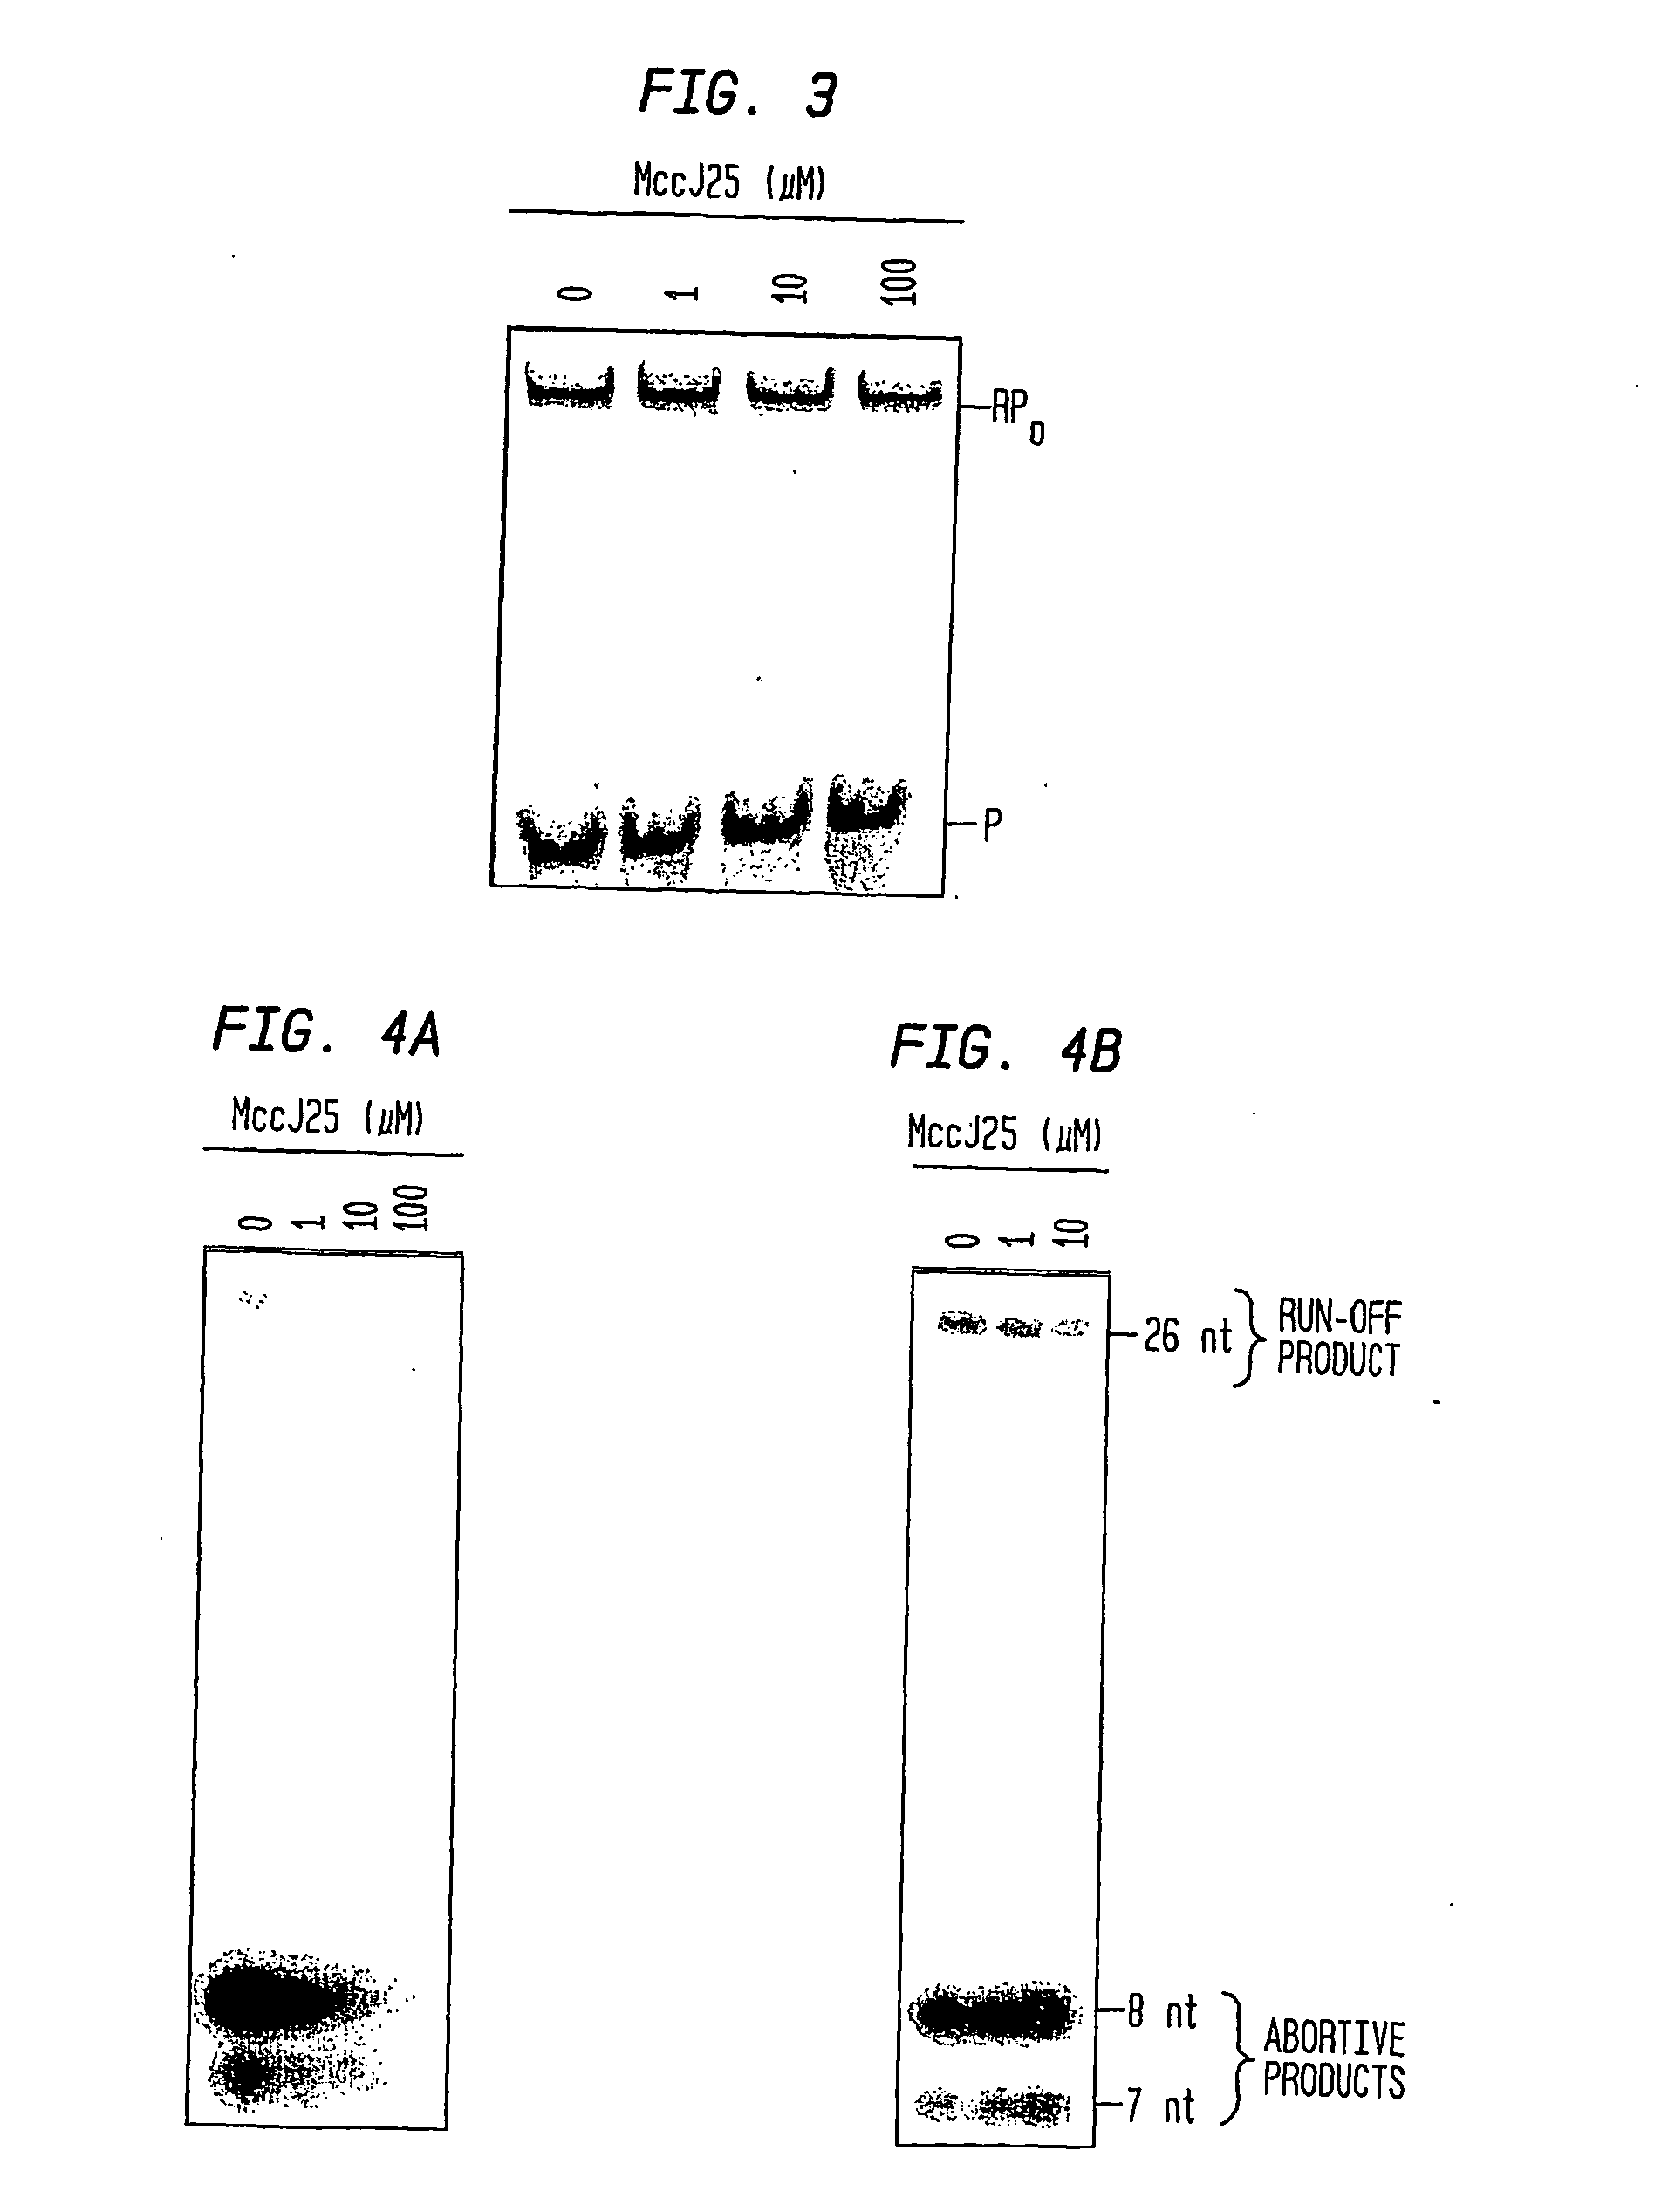 Target and method for inhibition of bacterial rna polymerase